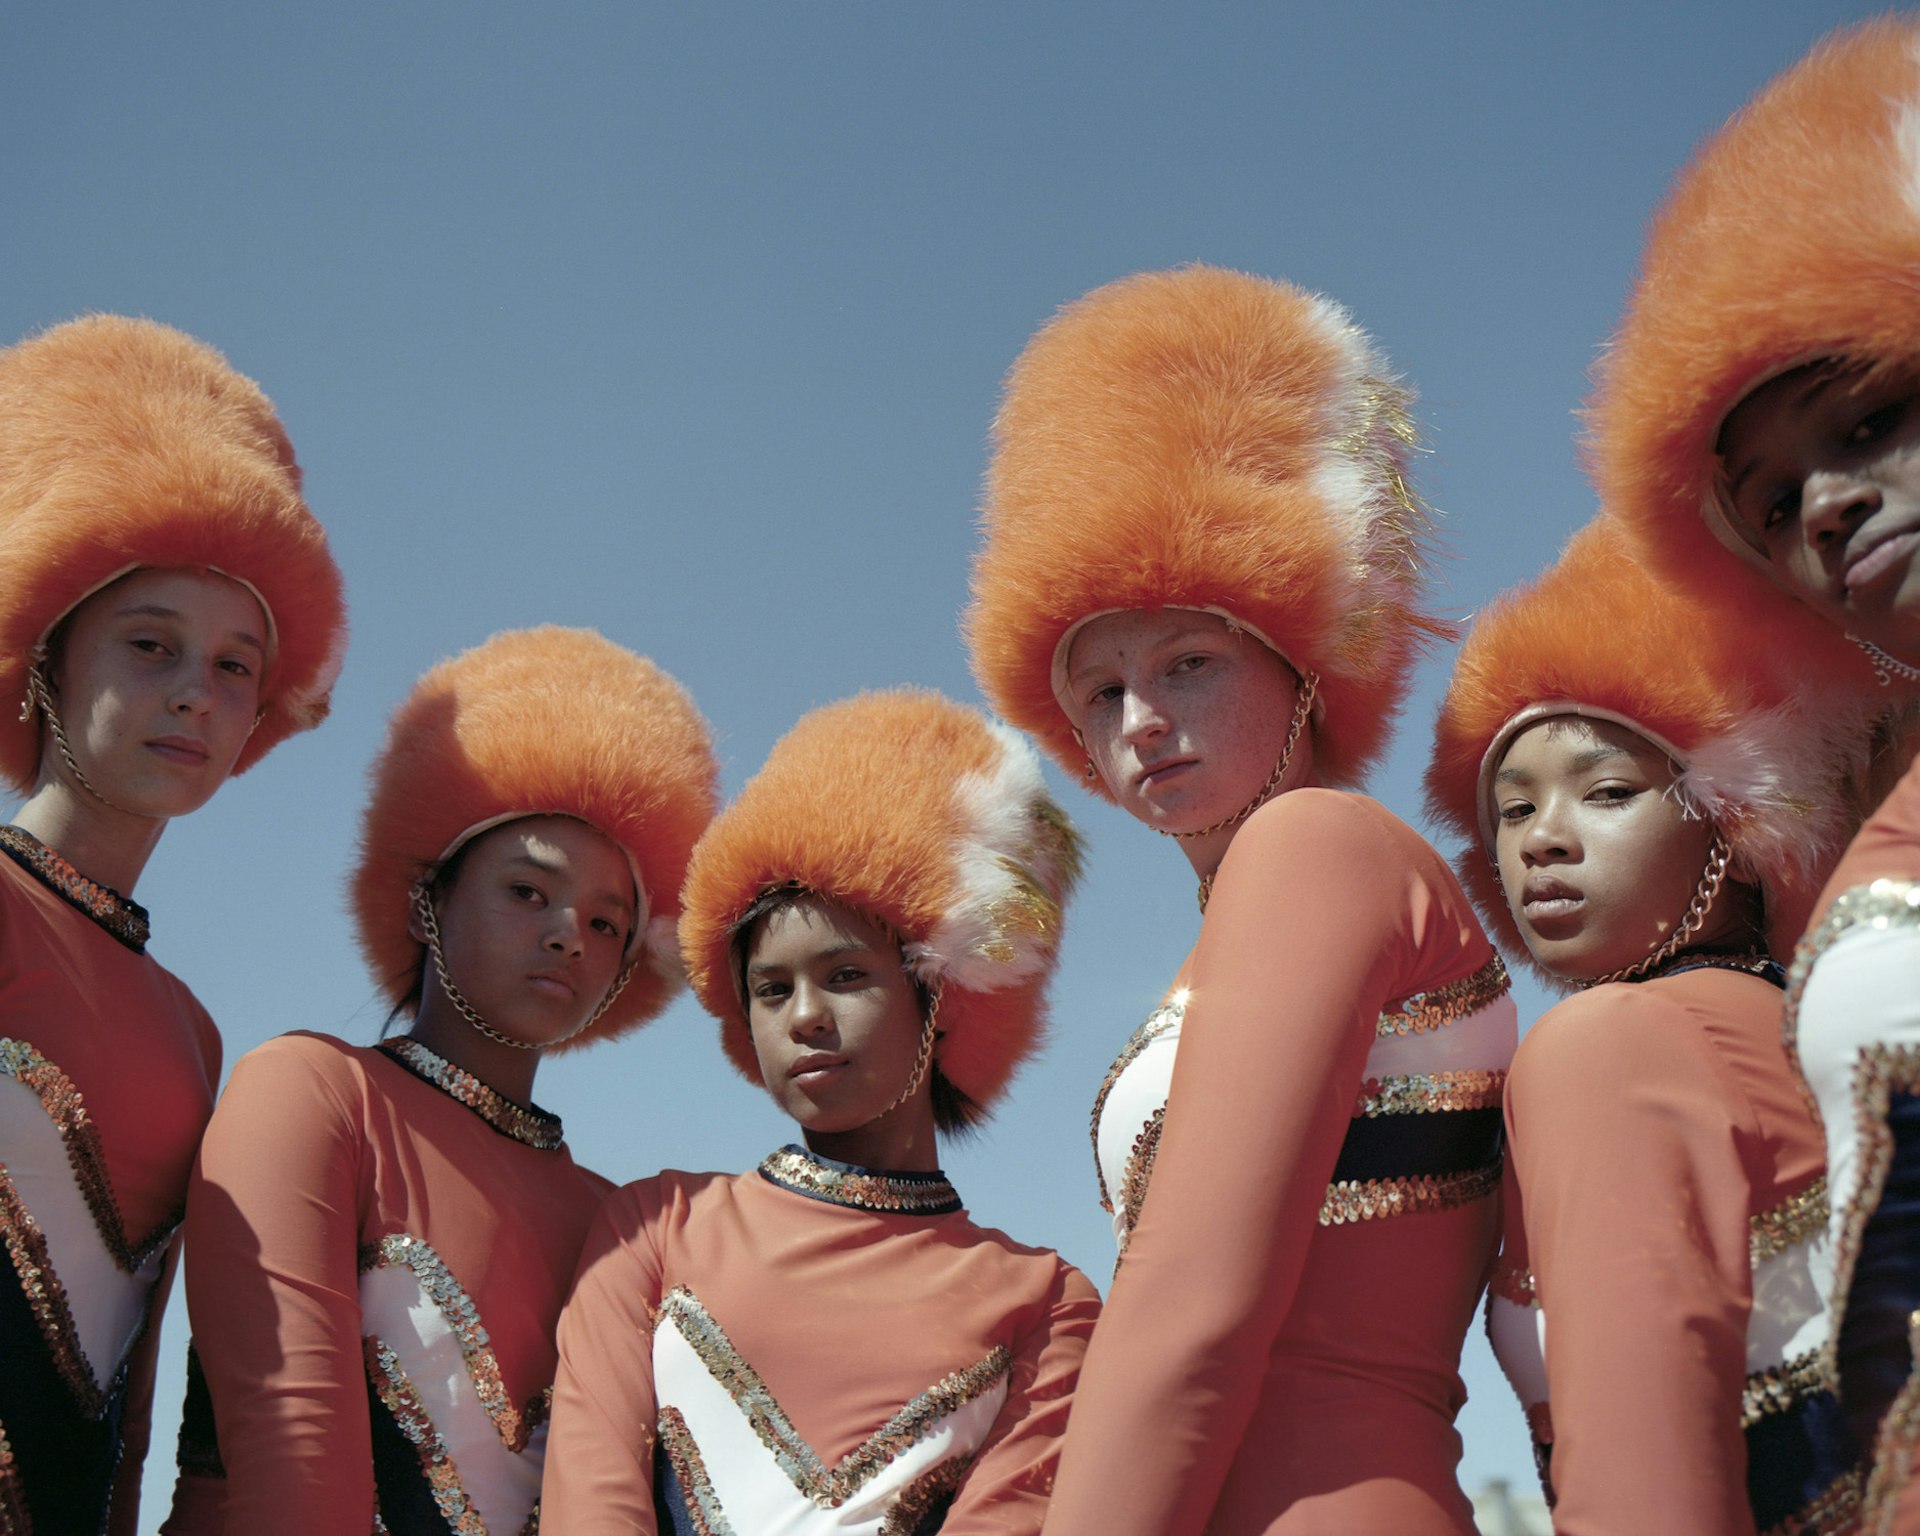 The power & pride of South Africa’s drum majorettes